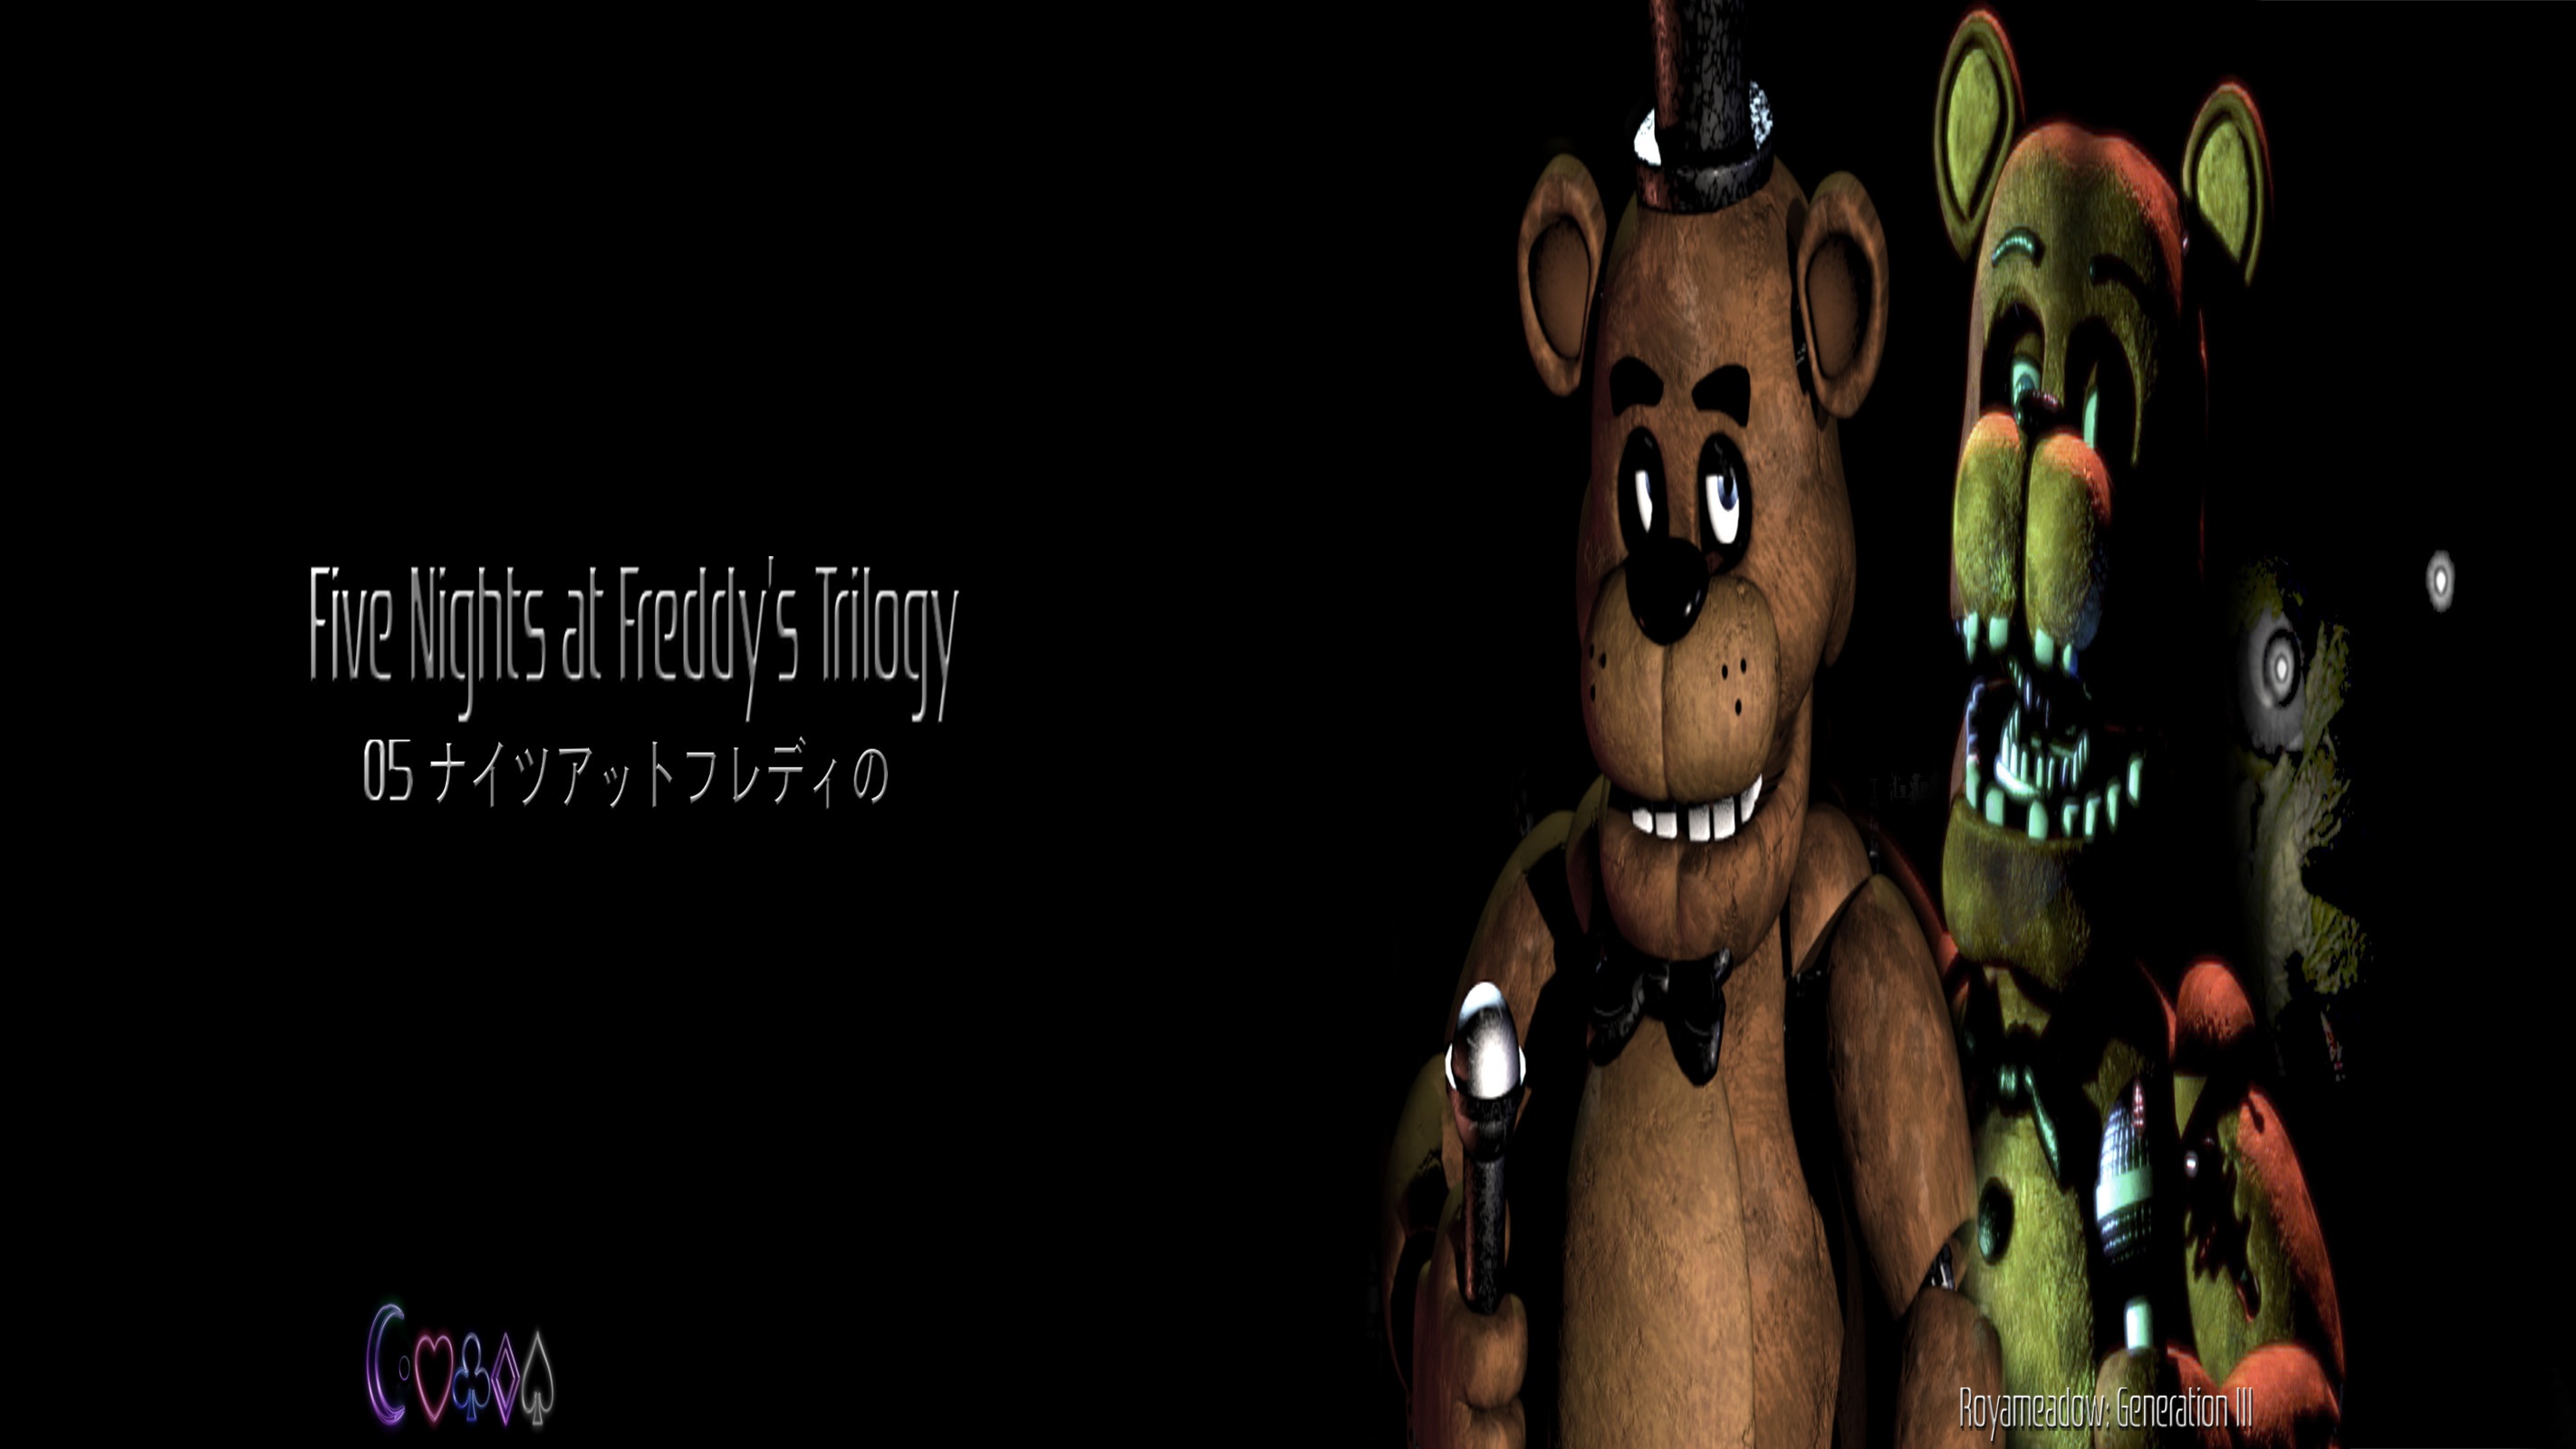 Five Nights at Freddys Trilogy Video Wallpaper by Royameadow